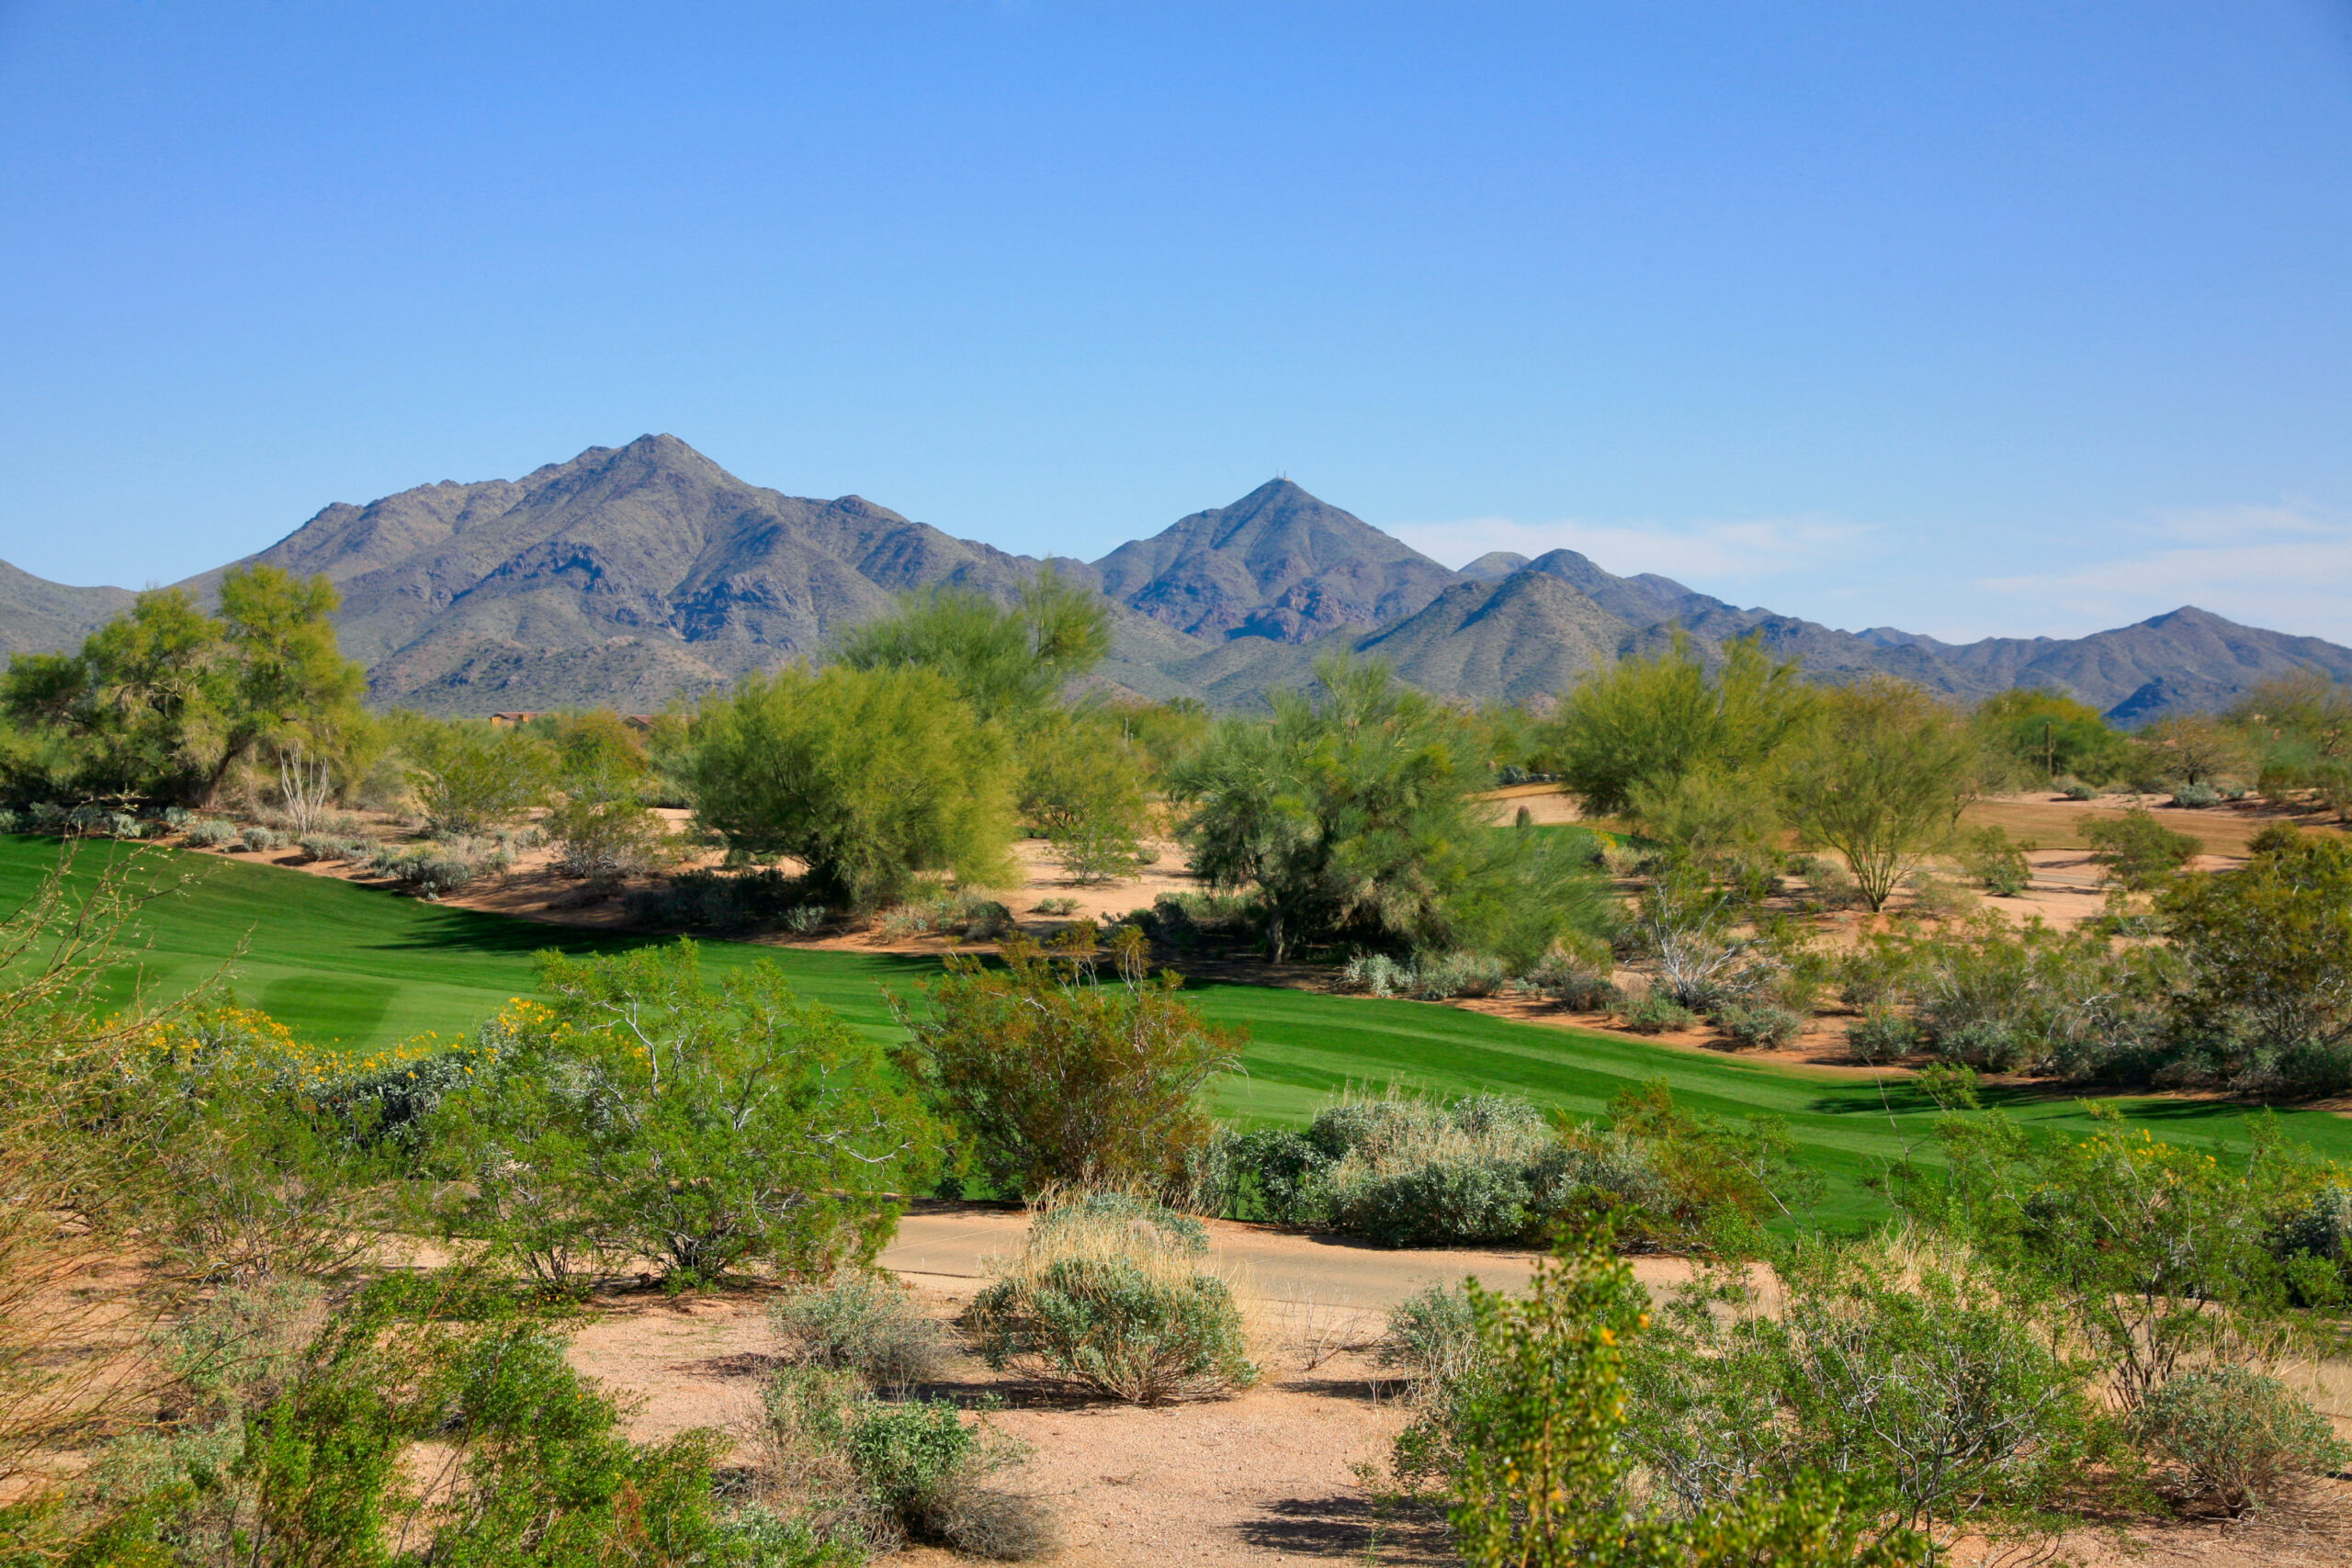 Grayhawk Golf Club in Scottsdale strives to make golf entertaining for everyone